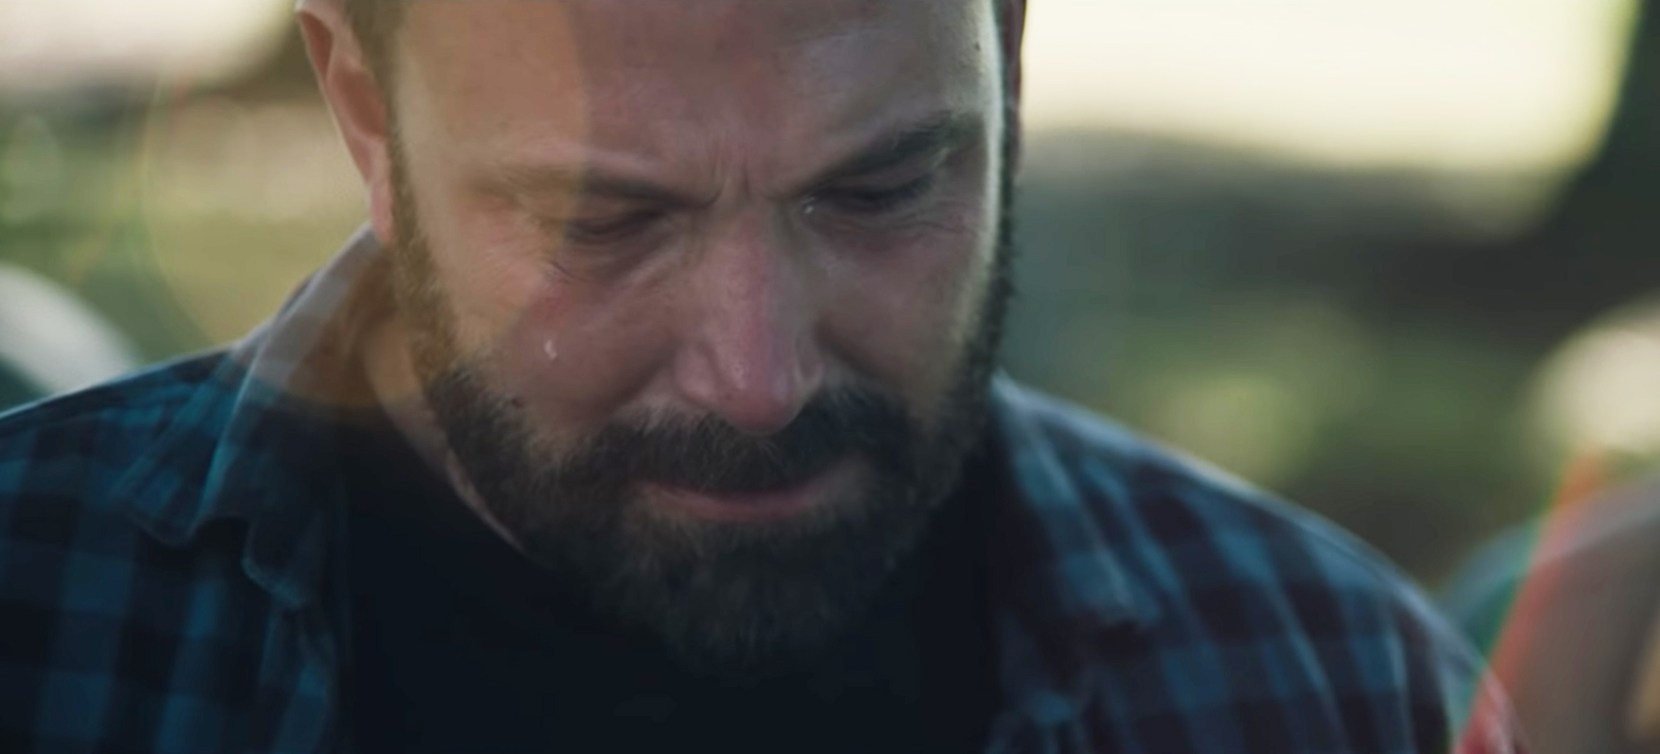 Ben Affleck Plays an Alcoholic in New Movie 'The Way Back' Watch